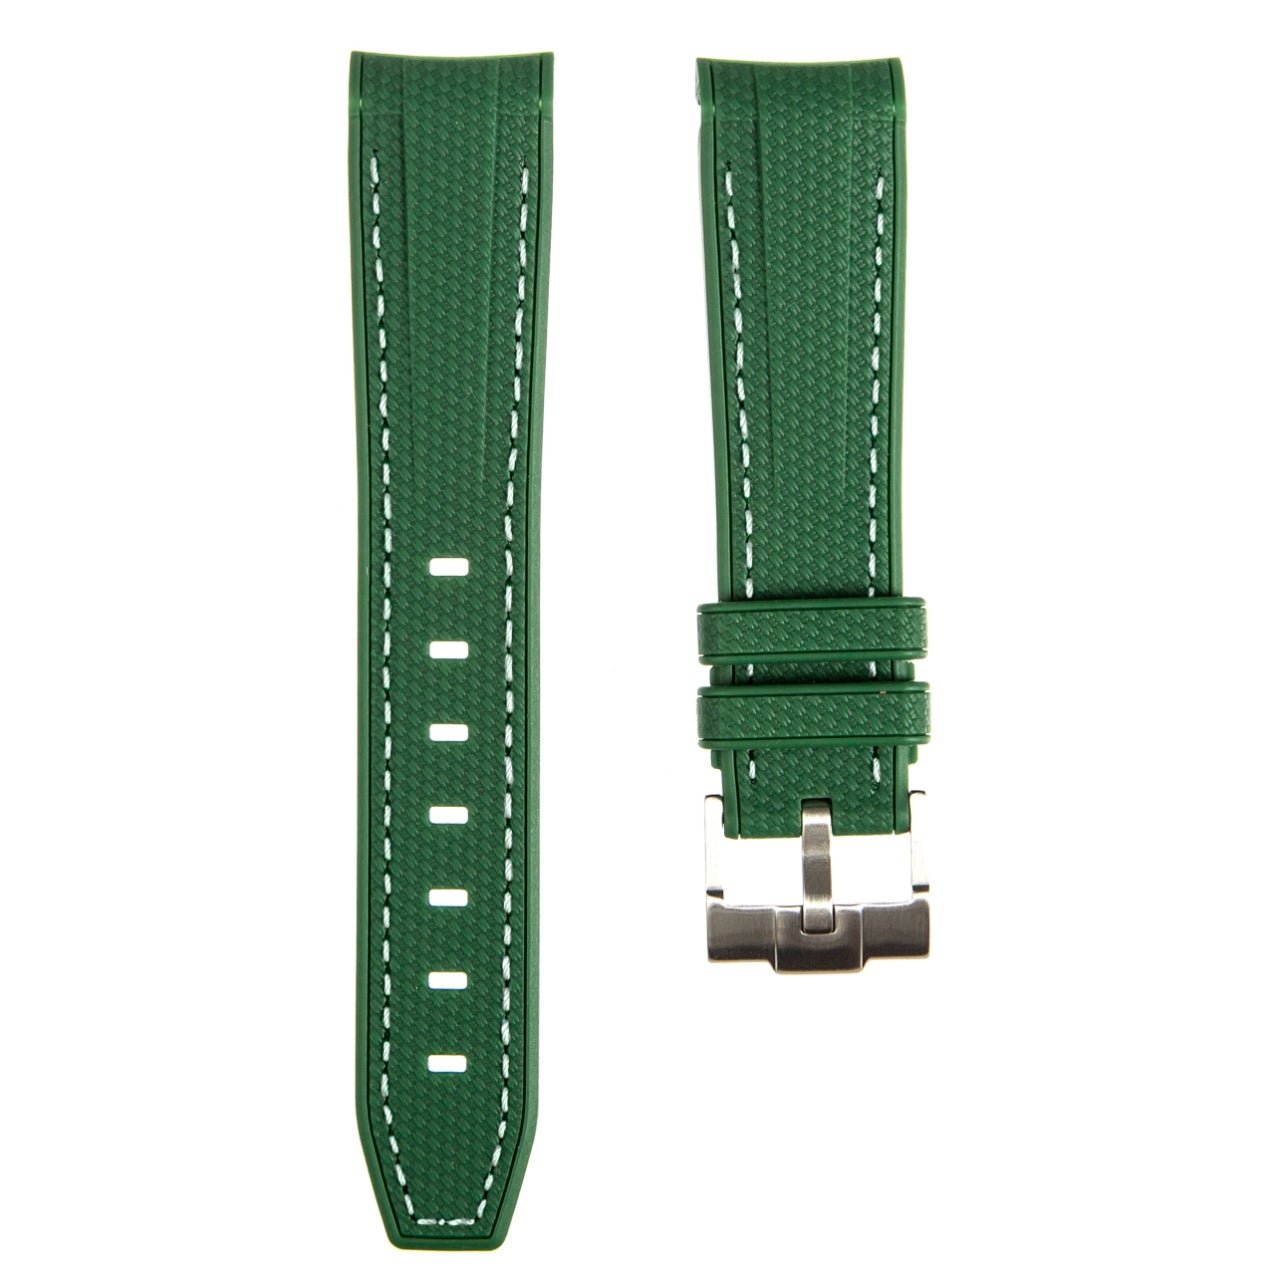 Textured Curved End Premium Silicone Strap - Compatible with Omega Moonwatch - Dark Green With White Stitch (2405) -StrapSeeker